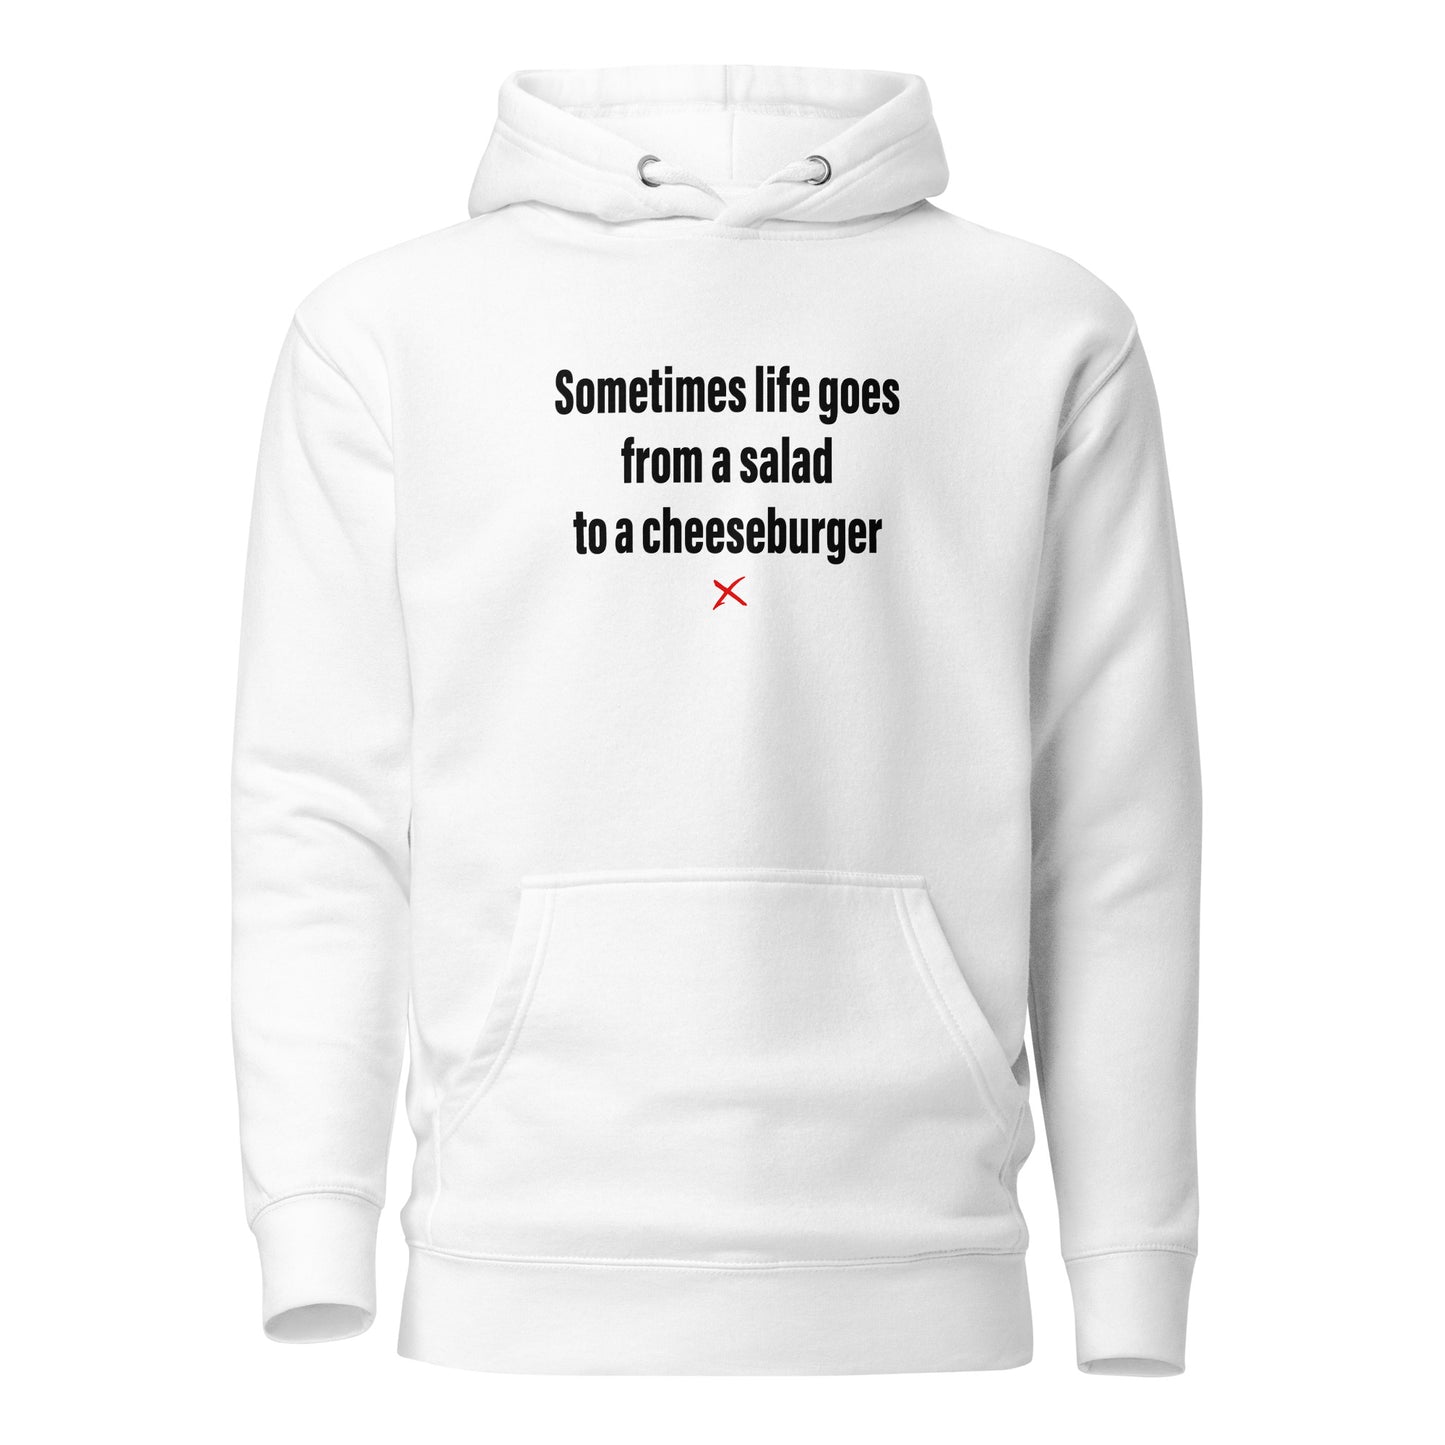 Sometimes life goes from a salad to a cheeseburger - Hoodie